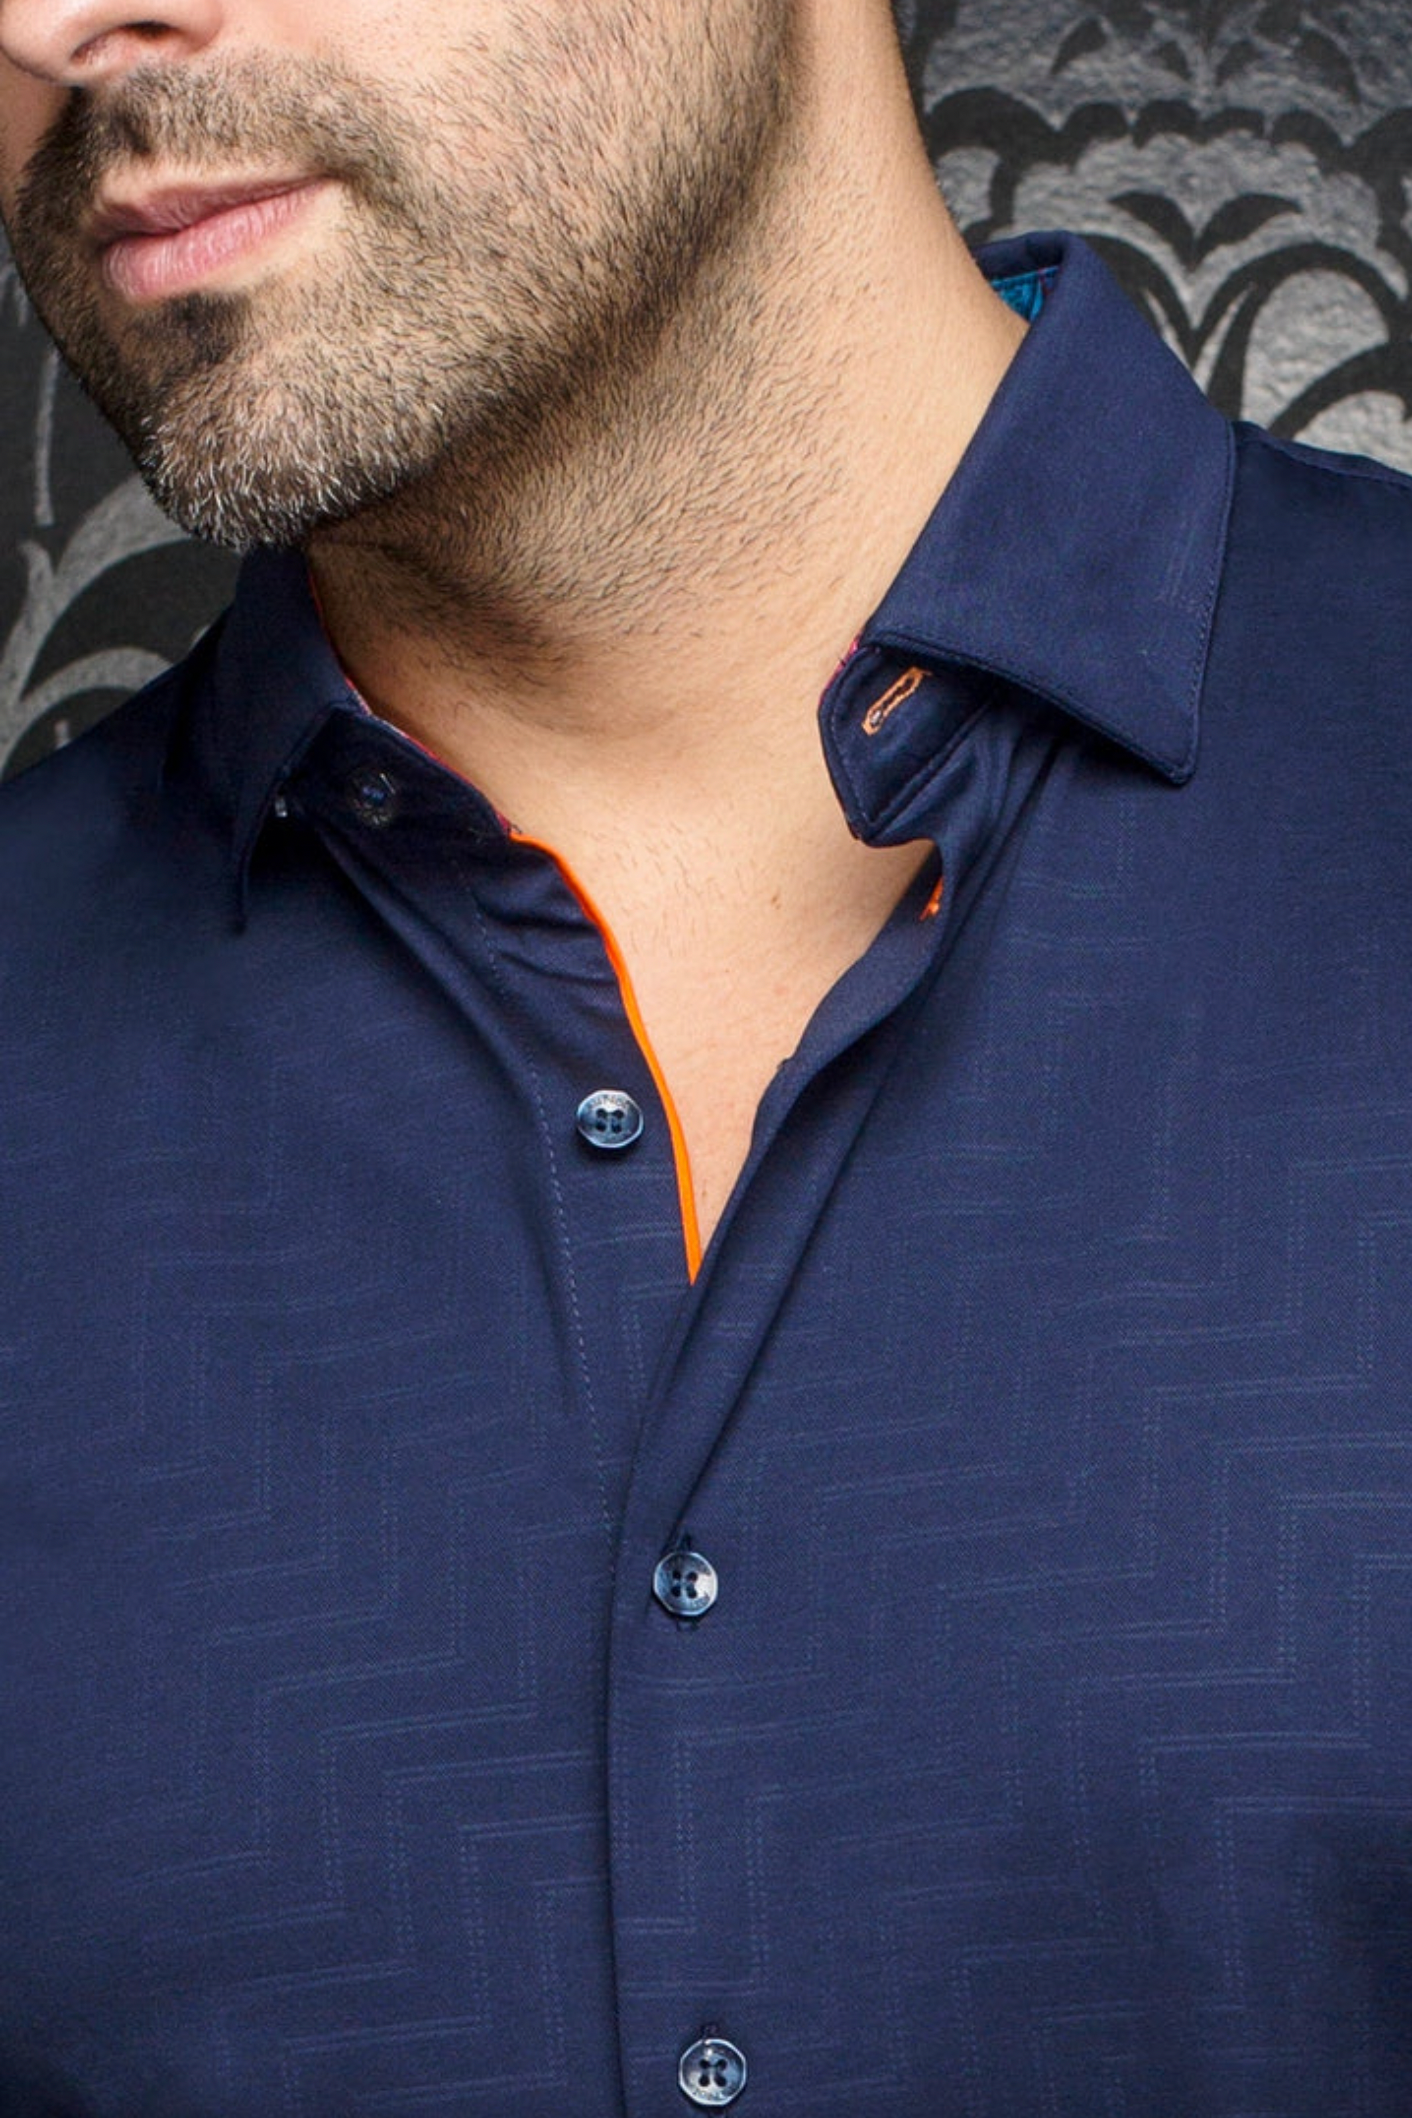 This is a collection of comfortable, performance stretch, fashionable dressy and casual shirts. Stand out from the crowd, thanks to Au Noirs cleaver use of contrasting patterns and sophisticated details. Comfortable with a high quality, performance stretch cotton fabric.